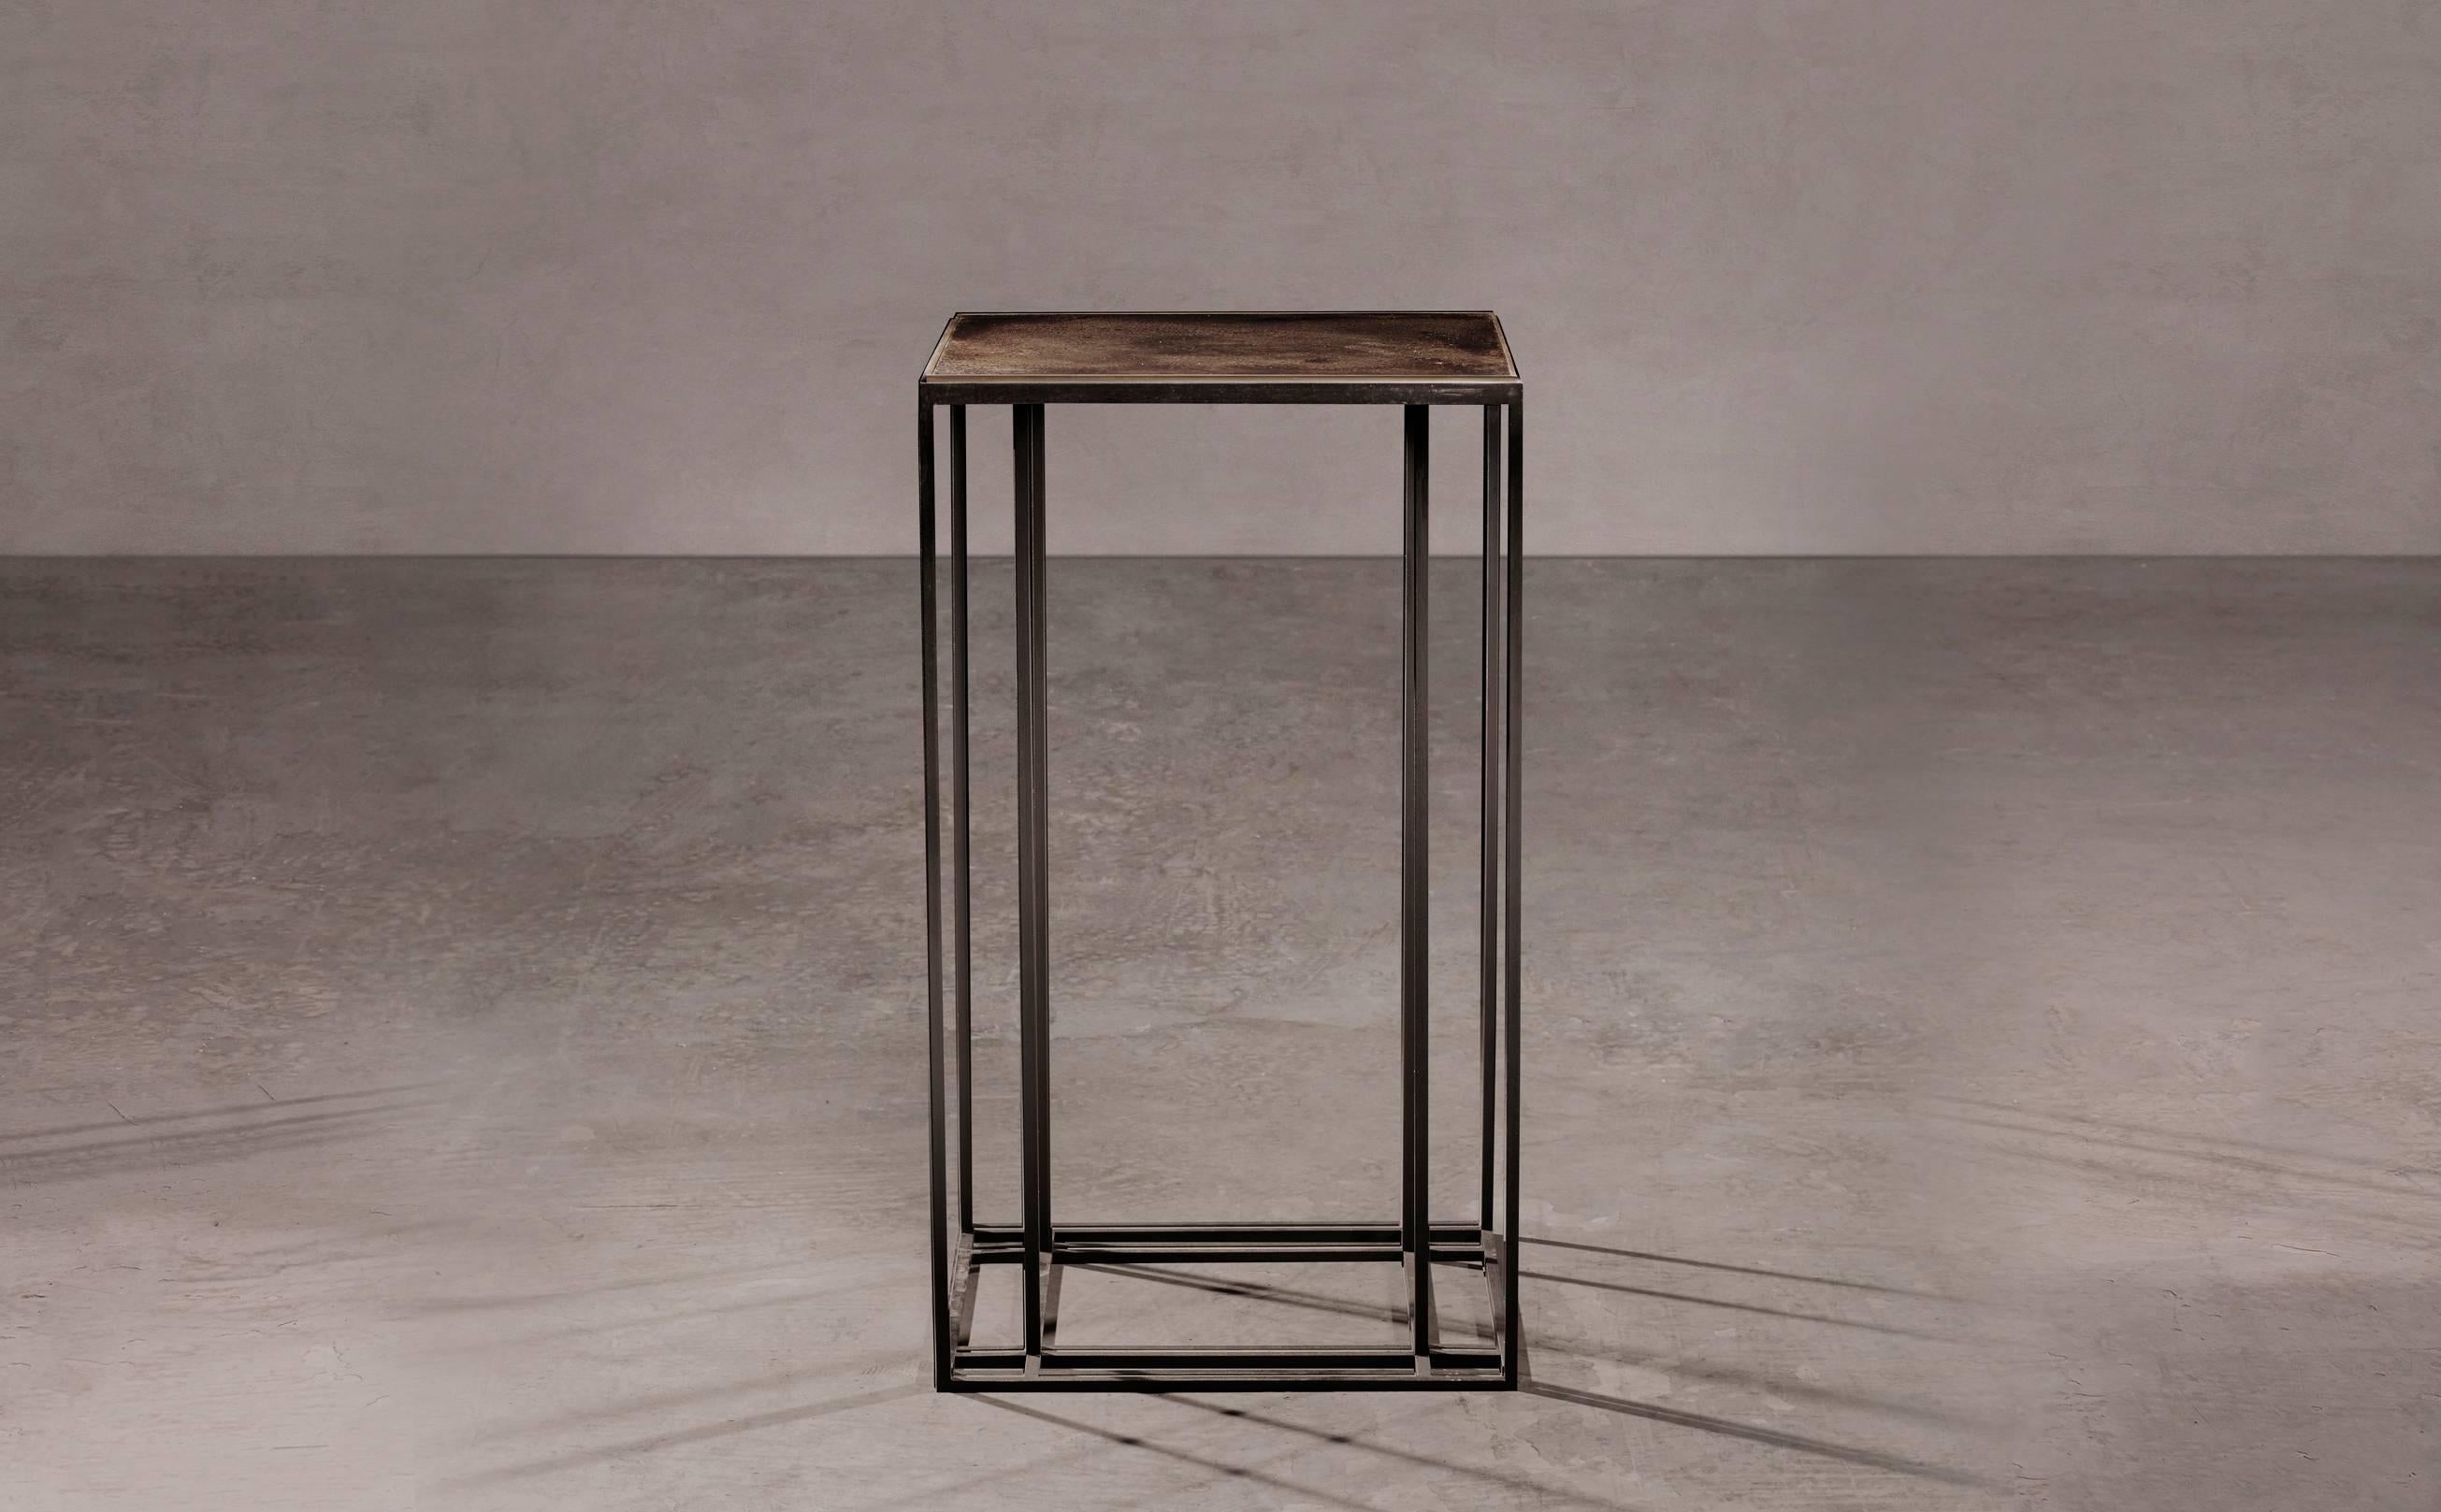 A display table in blackened steel and patinated brass, with a polished brass trim. Hand crafted in the North to order. Custom sizes and finishes are available.

Measures: 70cm (height) x 40cm (width) x 40cm (depth).
Custom sizes available.

Made to